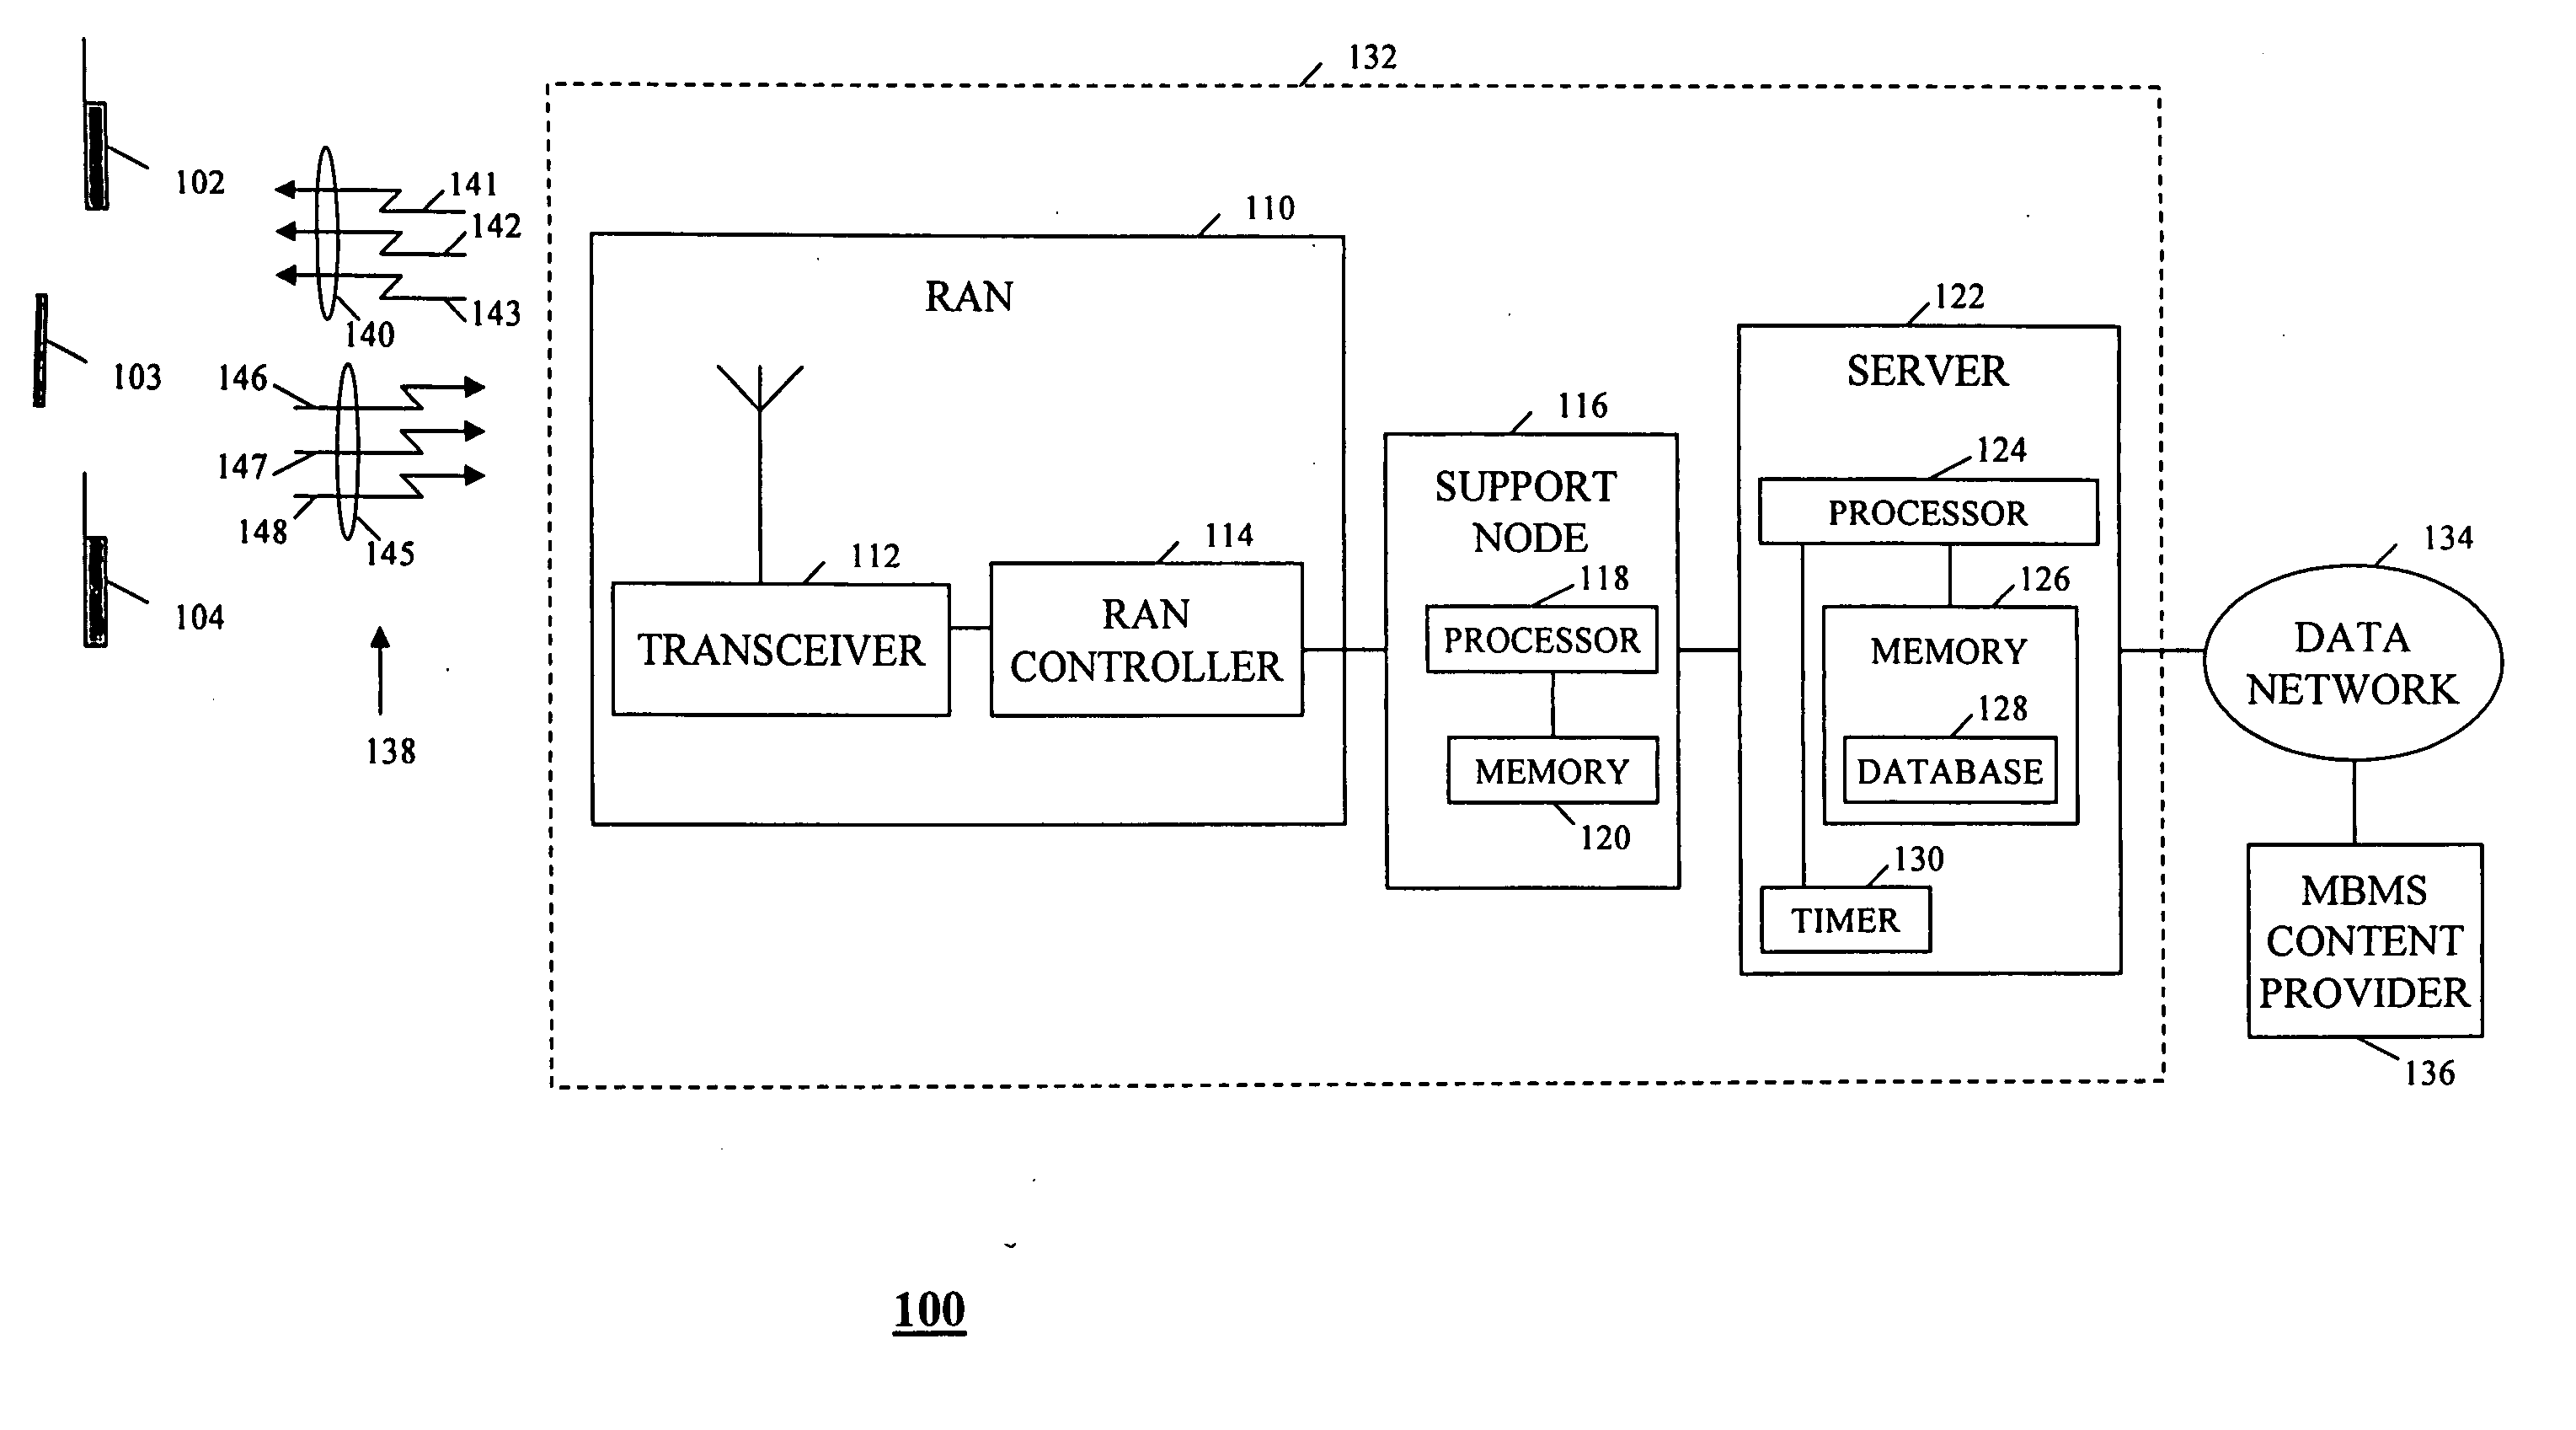 Method and apparatus for assigning temporary mobile group identity in a multimedia broadcast/multicast service